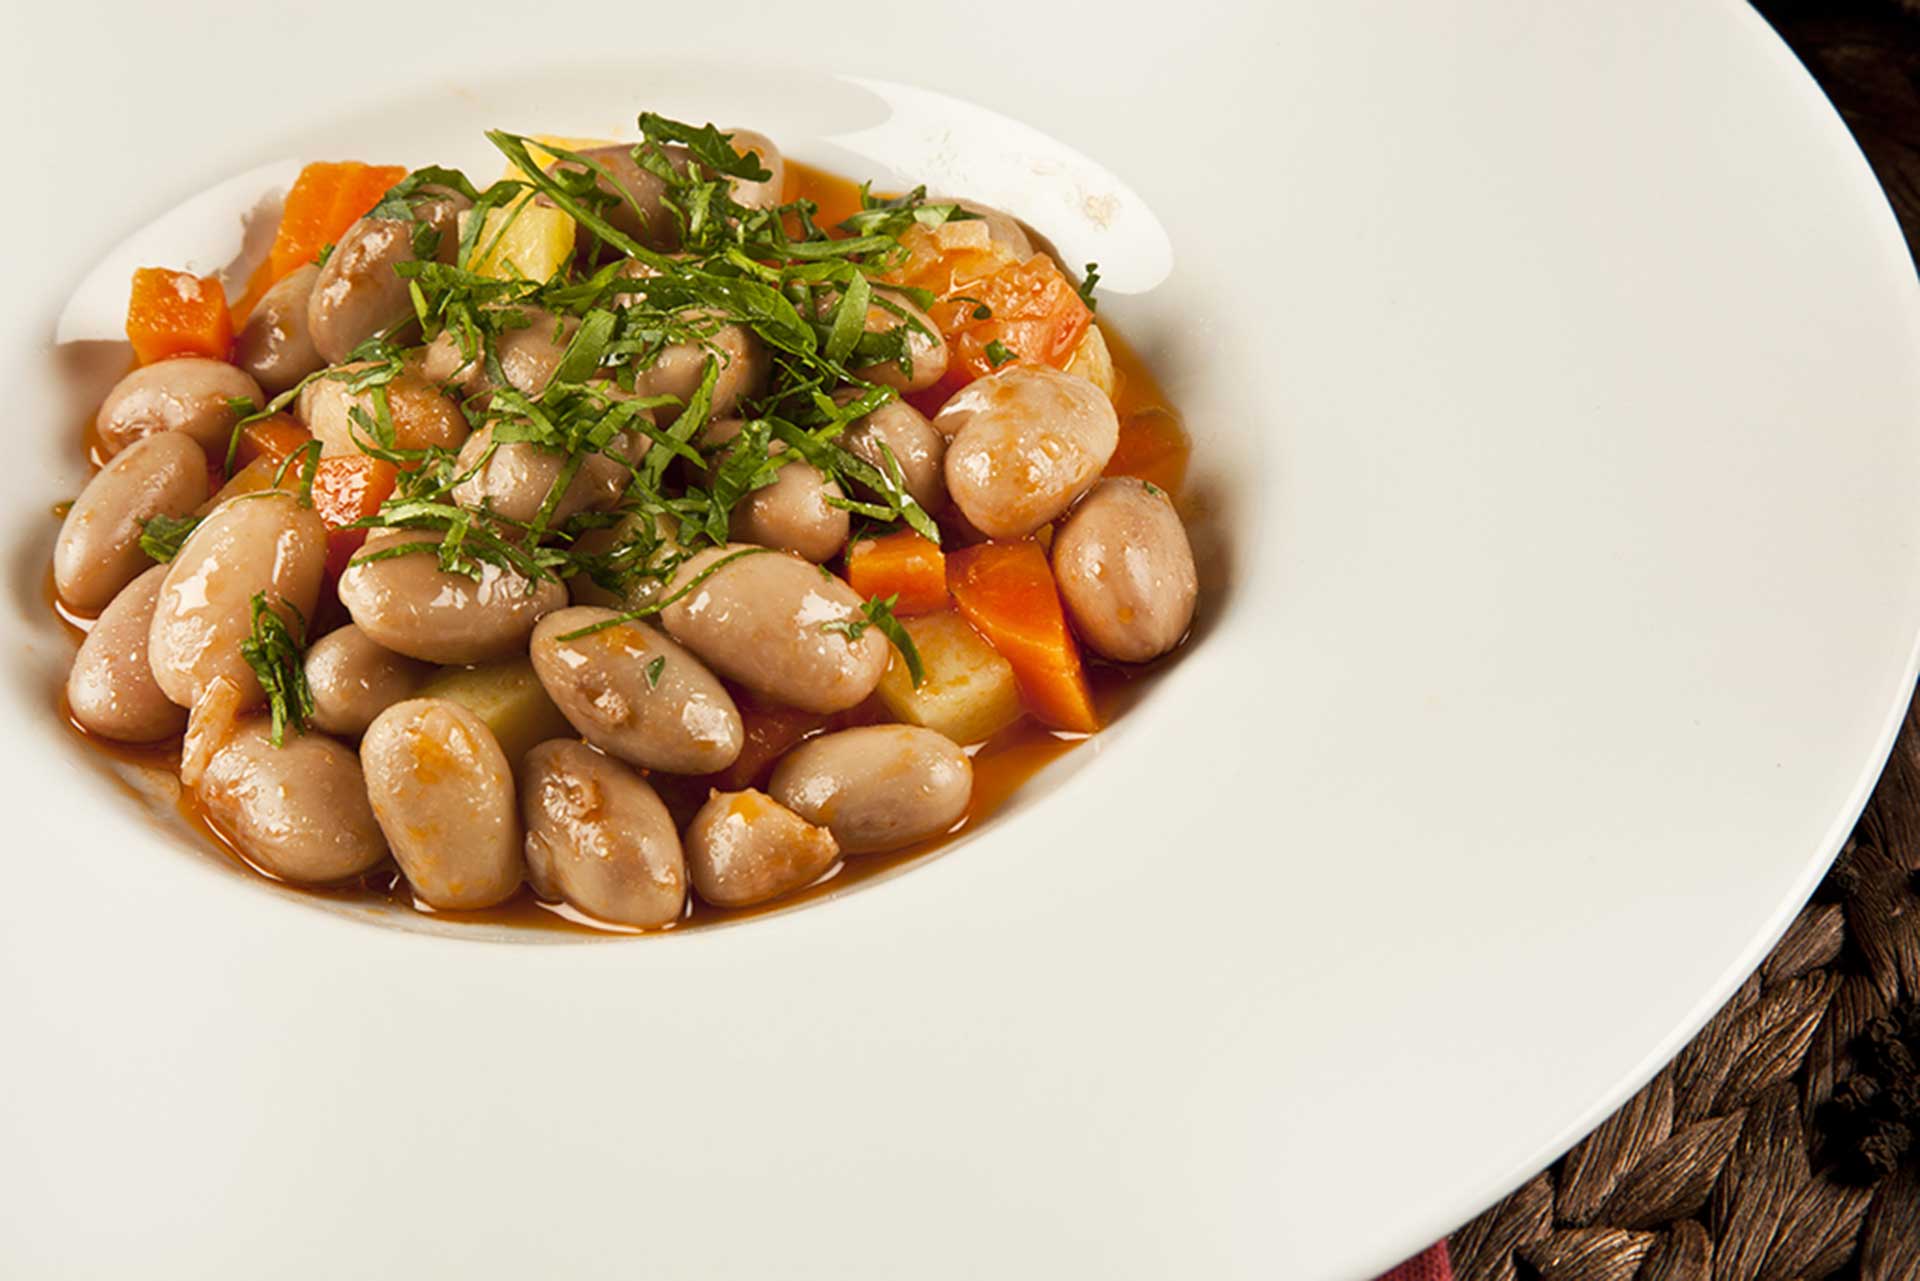 a dish of Turkish kidney beans served on a white plate